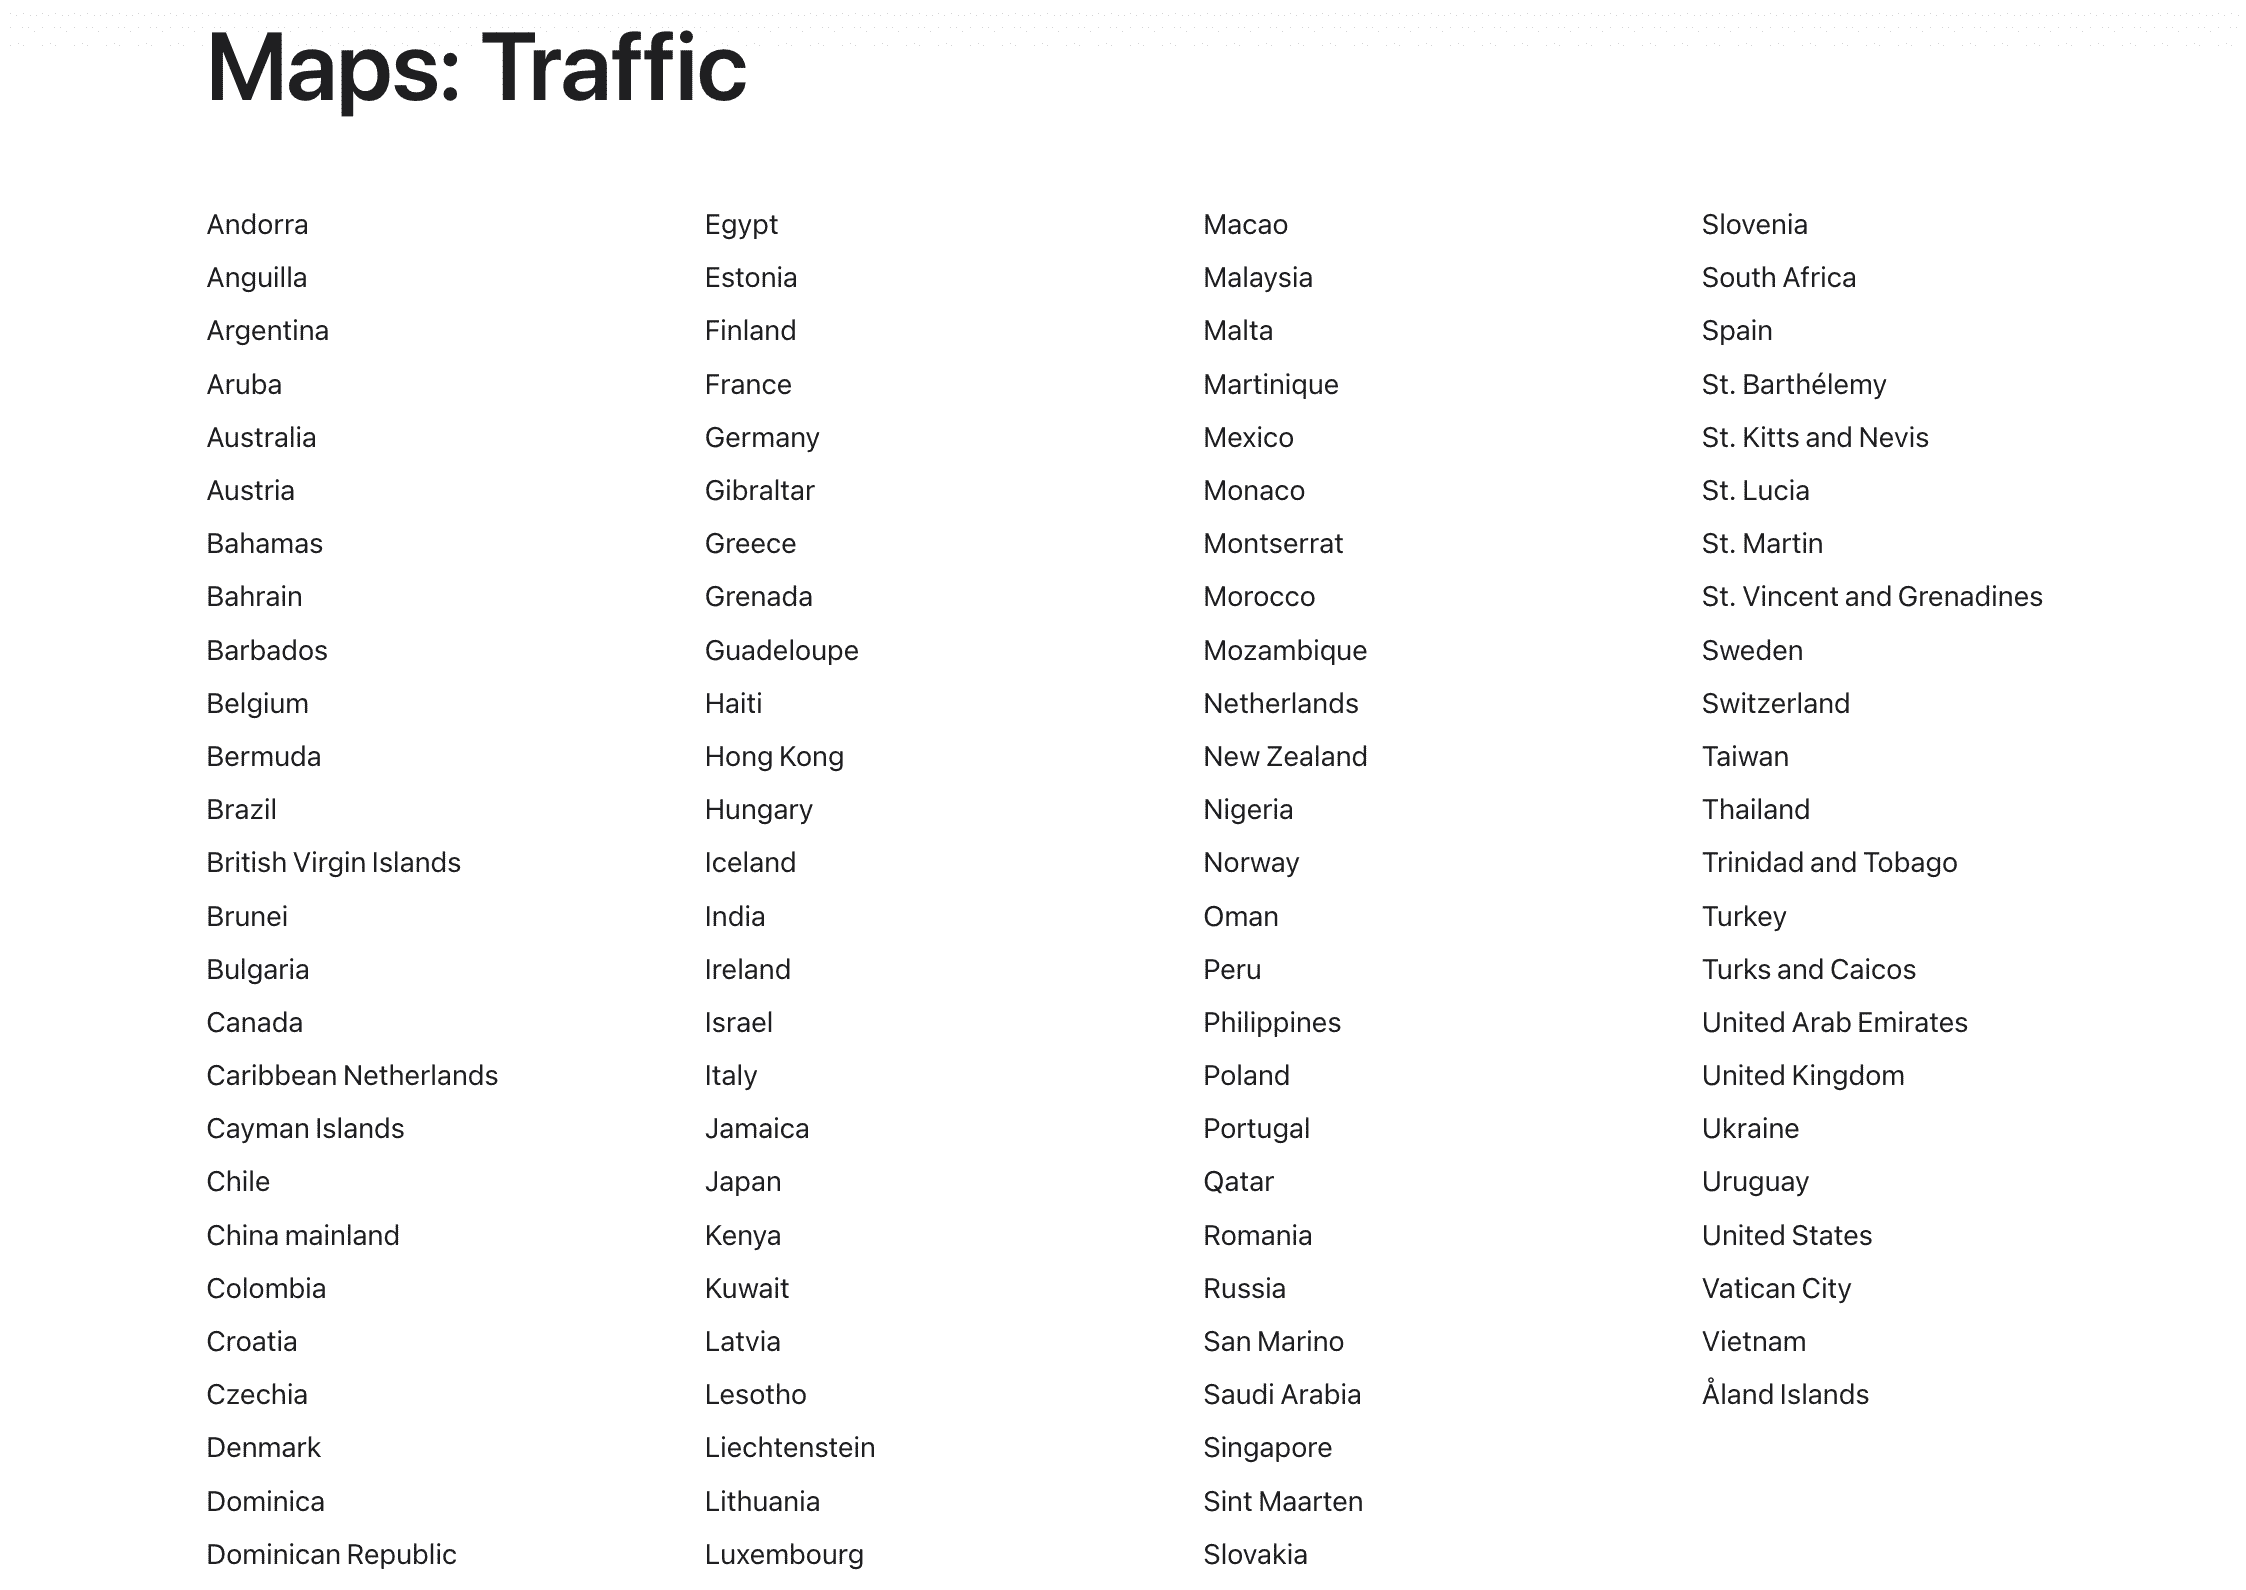 Apple Maps Traffic conditions are available in these countries